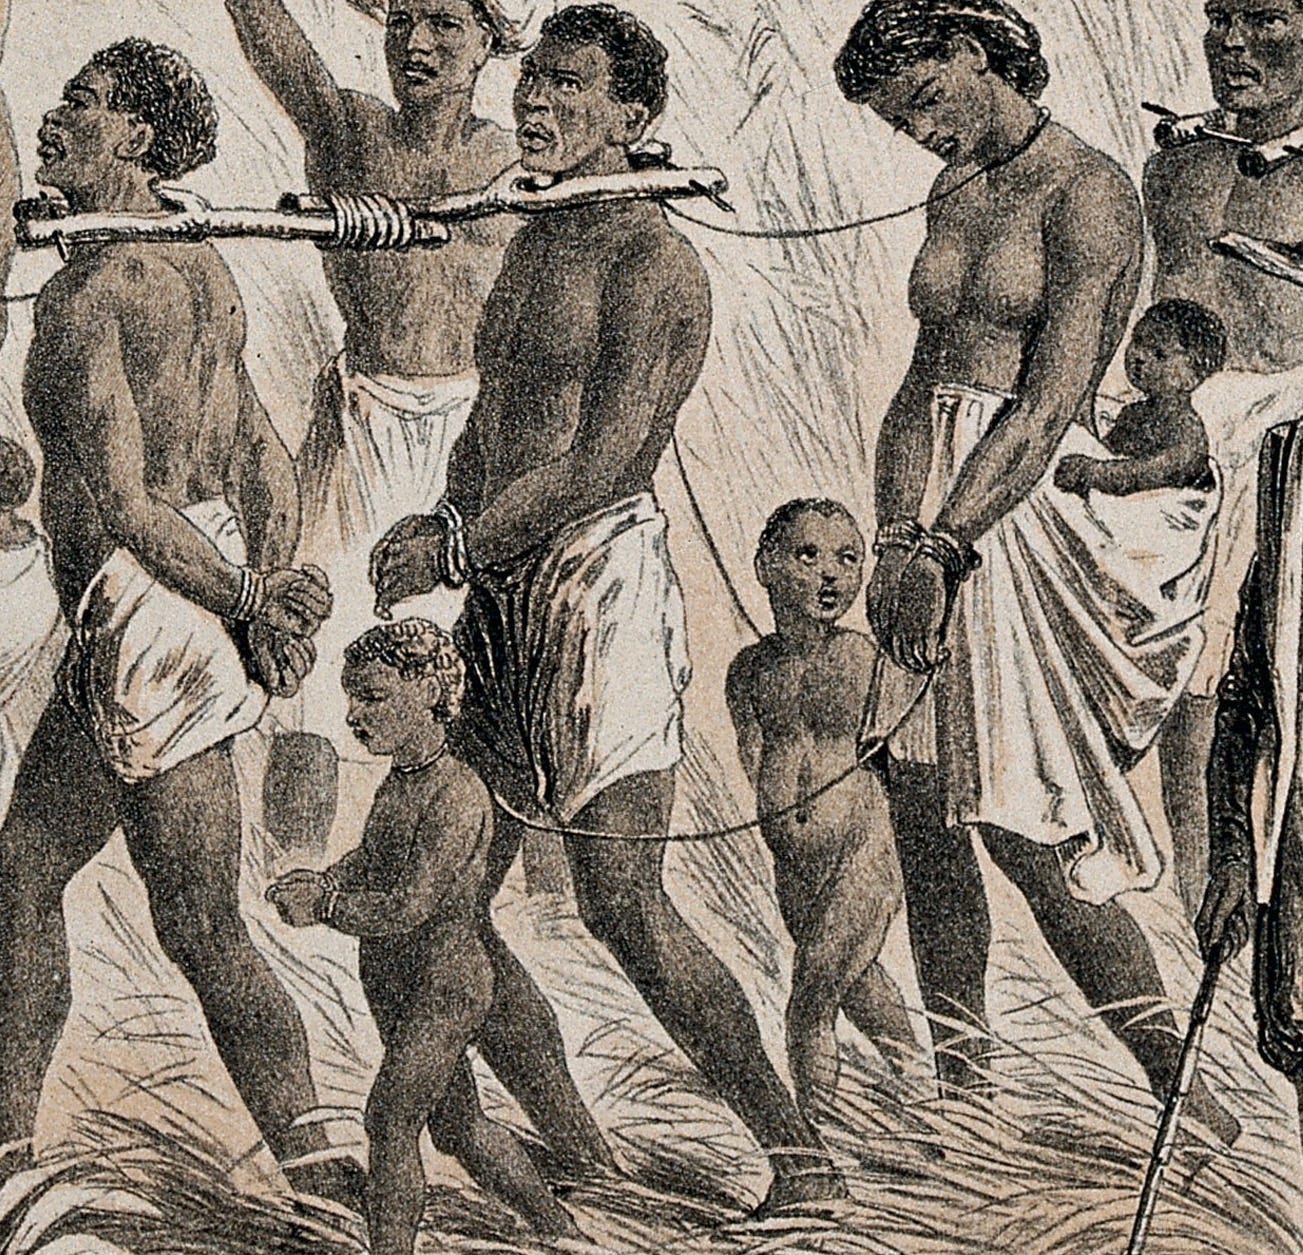 Slave coffle image by Iconographic Collections, CC BY 4.0, via Wikimedia Commons. This part of real American history is so well concealed that, despite extensive documentation of their existence, almost no engravings or other types of images portraying slave coffles (long marches of hundreds of miles in chains) are available. Women were often forced to march hundreds of miles, separated from families and/or husbands, to “breed” slave children.